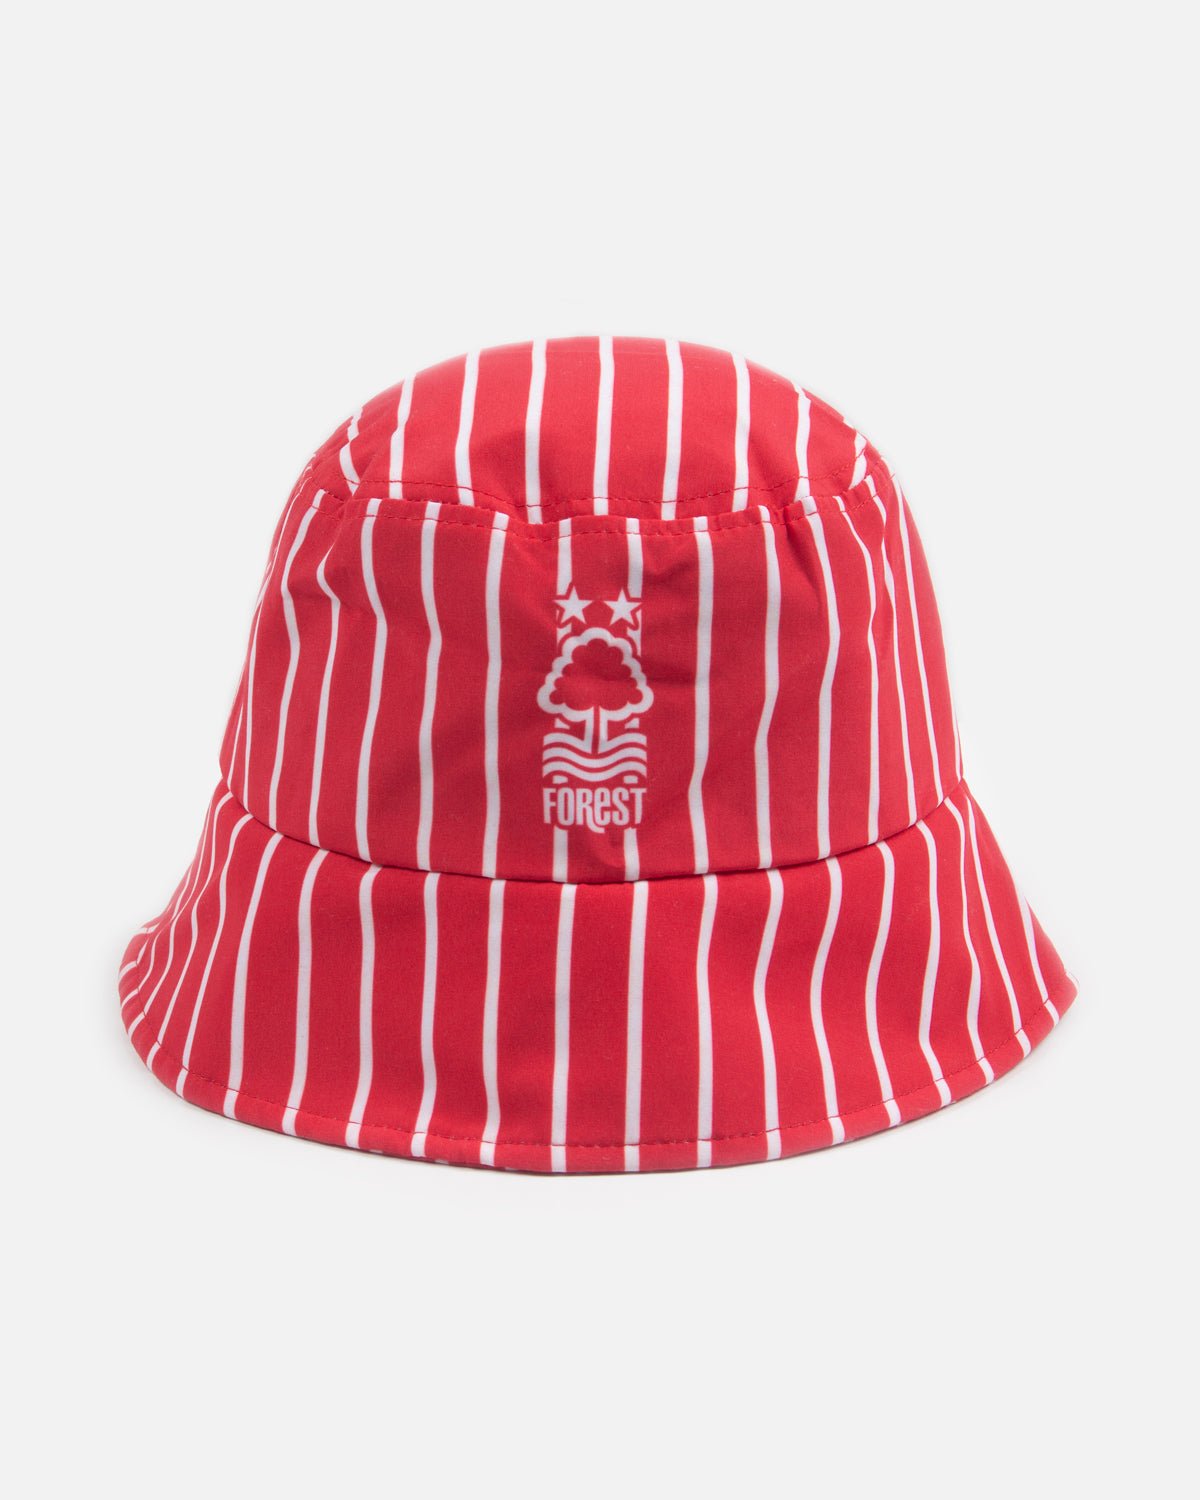 NFFC Red Striped Bucket Hat - Nottingham Forest FC